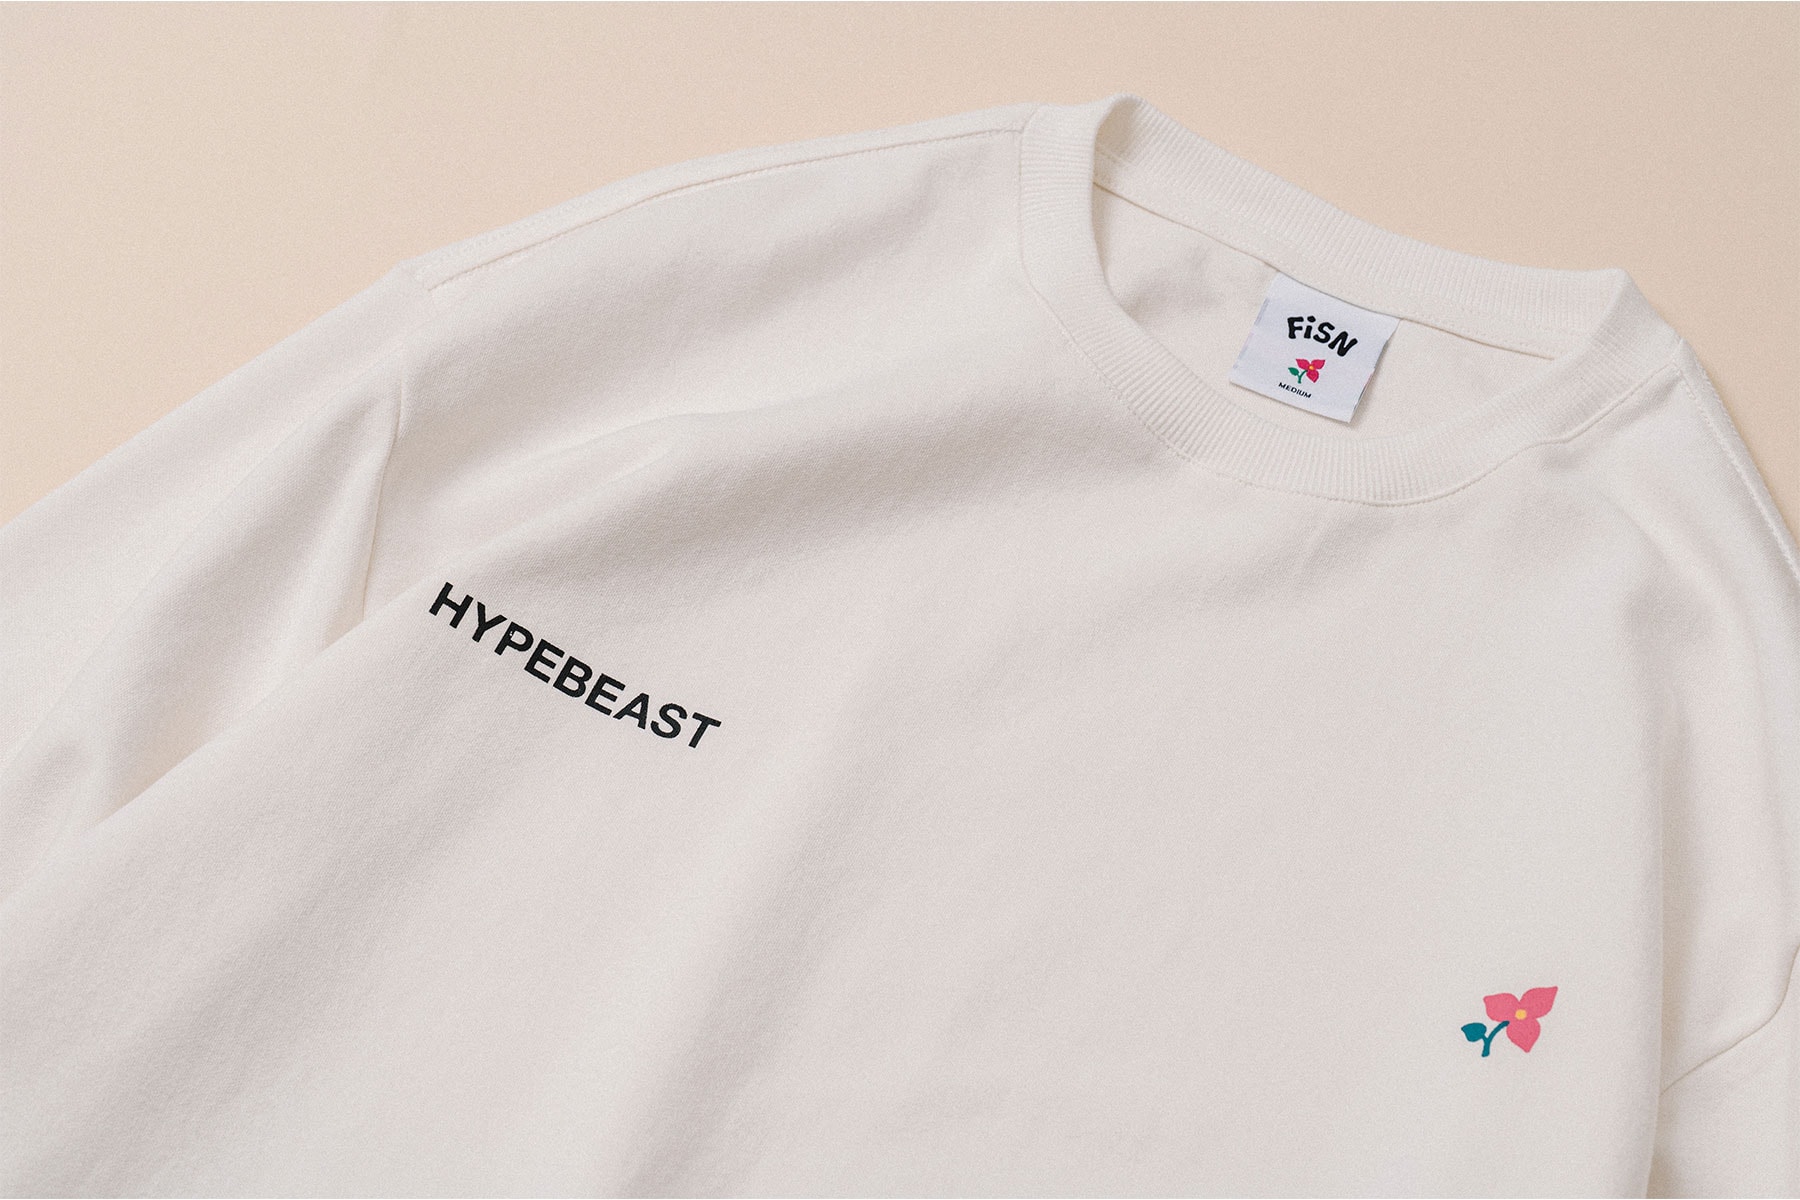 FiSN HYPEBEAST 1 Year Anniversary Collaboration release Shanghai Future Is Now Magazine Oallery long-sleeve